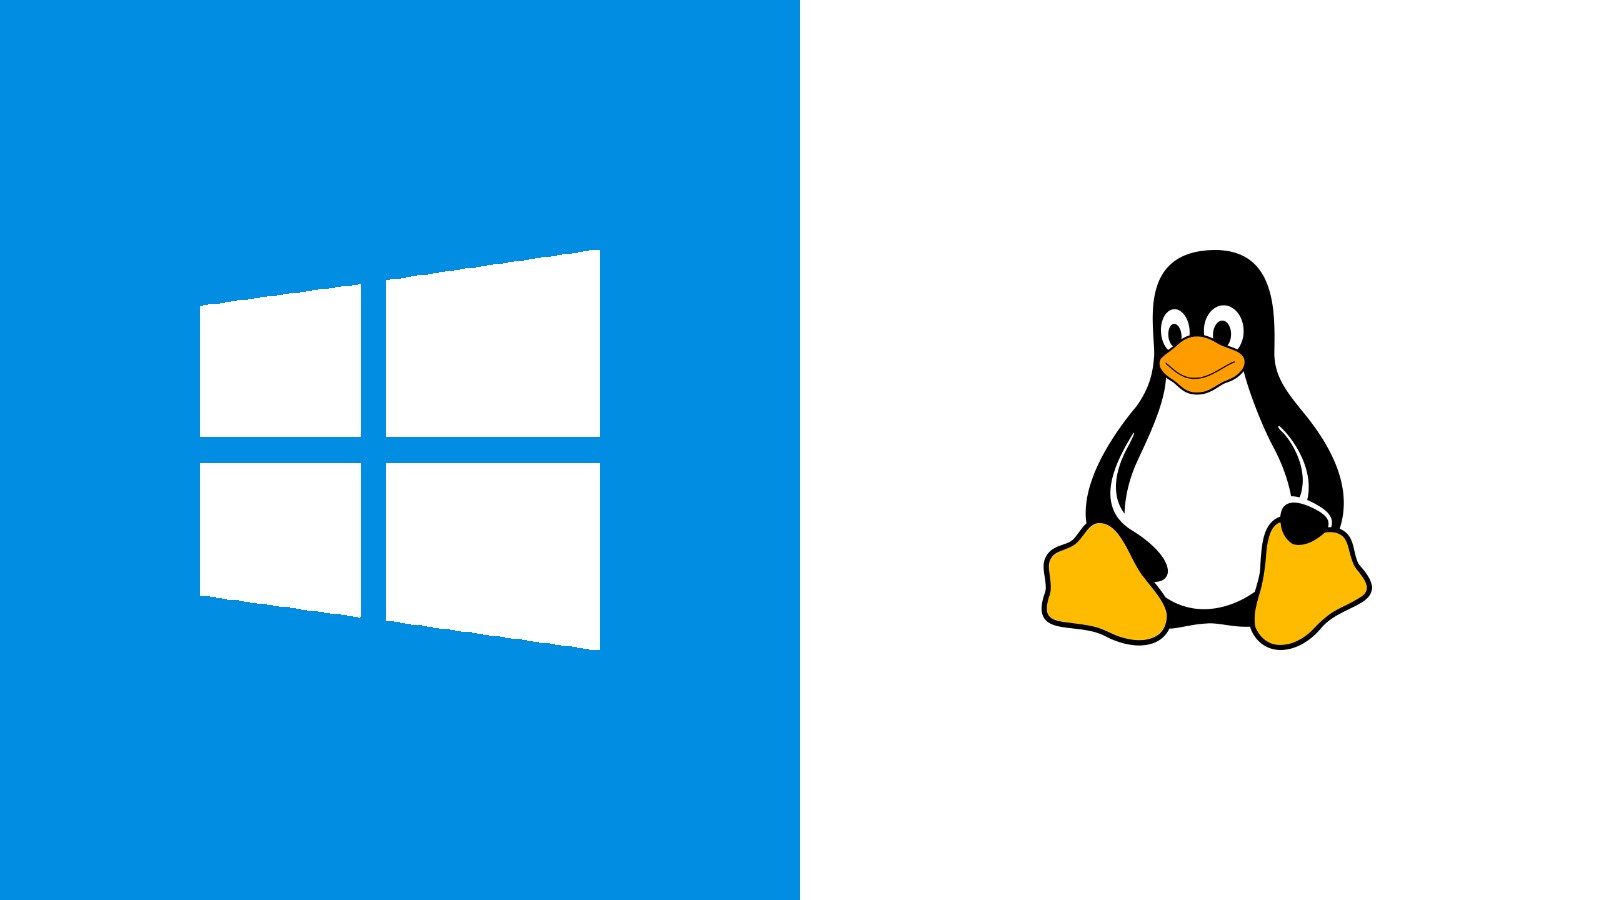 Windows to Linux